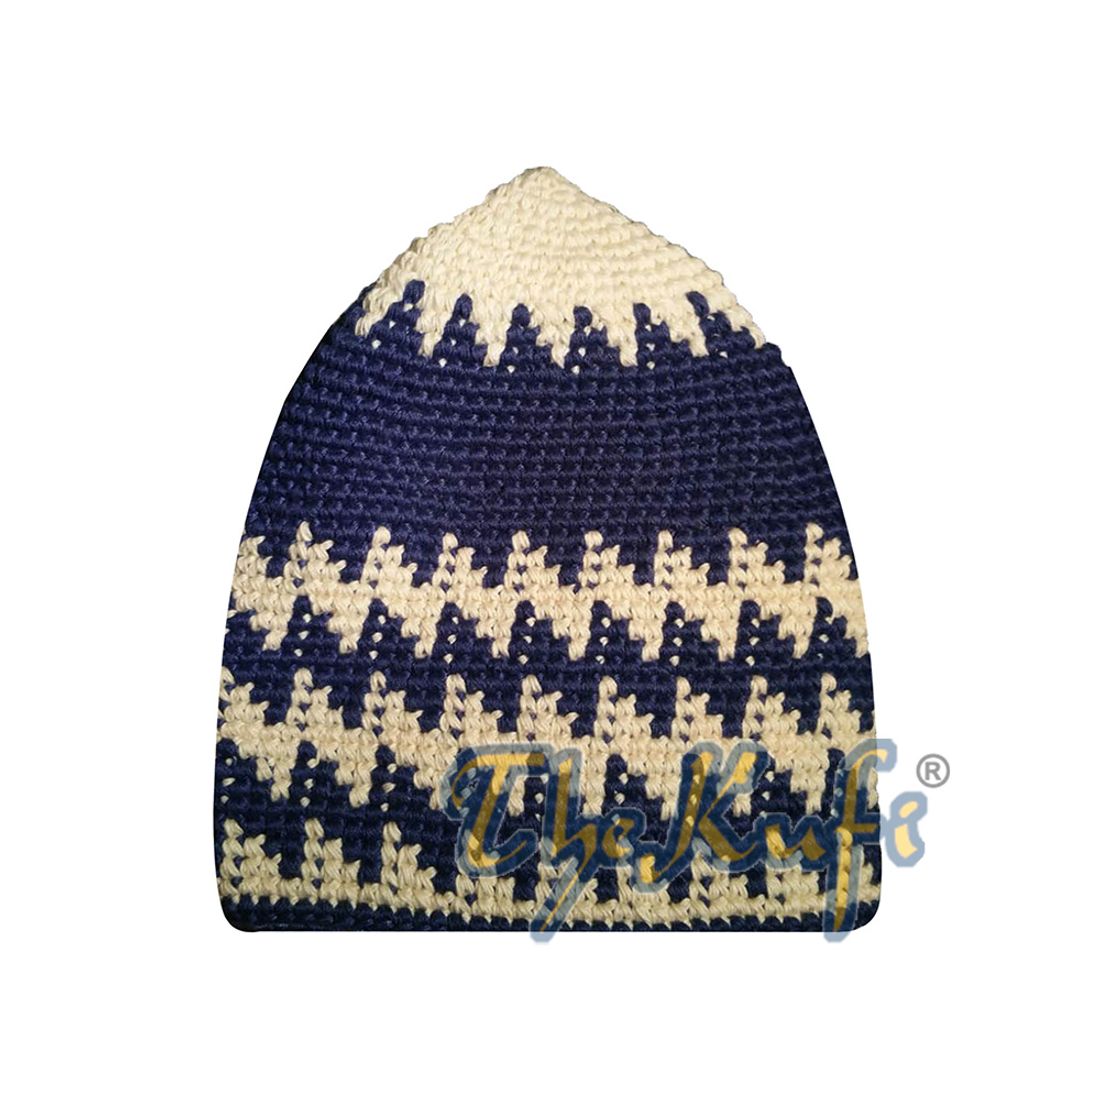 Hand-crocheted Cotton Sturdy Cream & Cobalt Blue Hounds-tooth Zigzag Kufi Hat